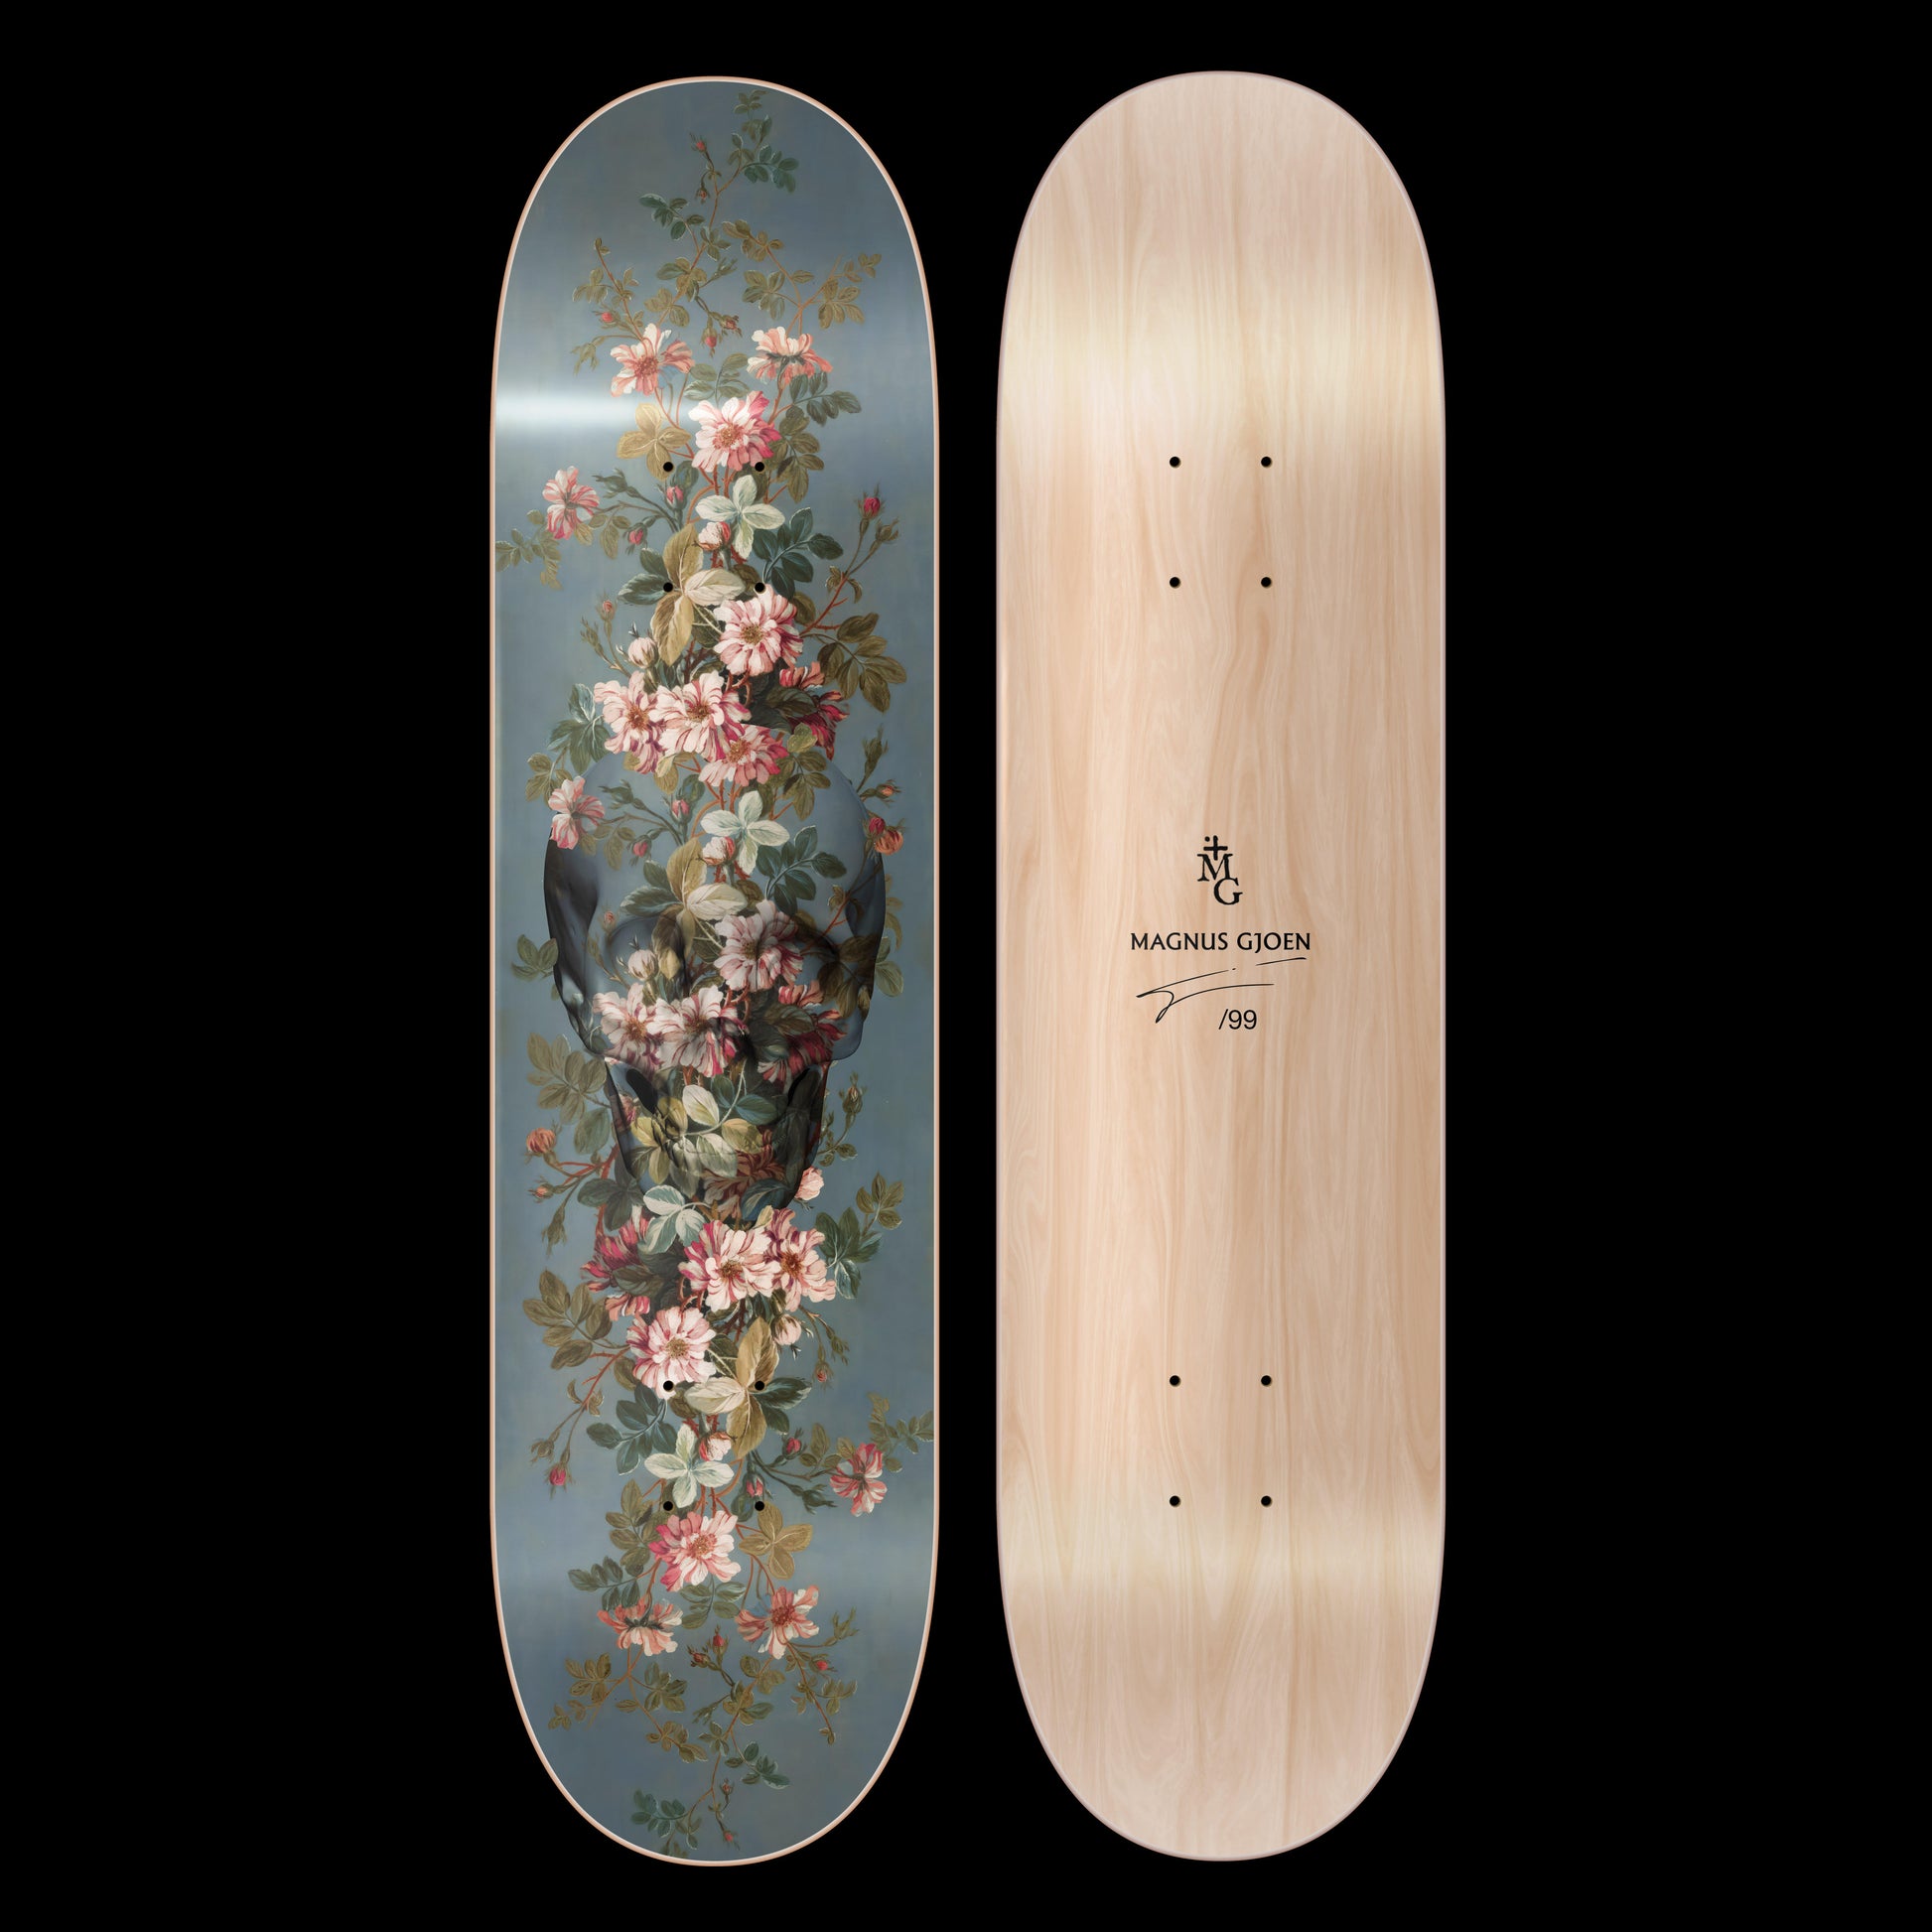 Magnus Gjoen, And Death Shall Have No Dominion skateboard for sale which contain a skull on a teal blue backgroung with flowers going thought the middle from top to bottom